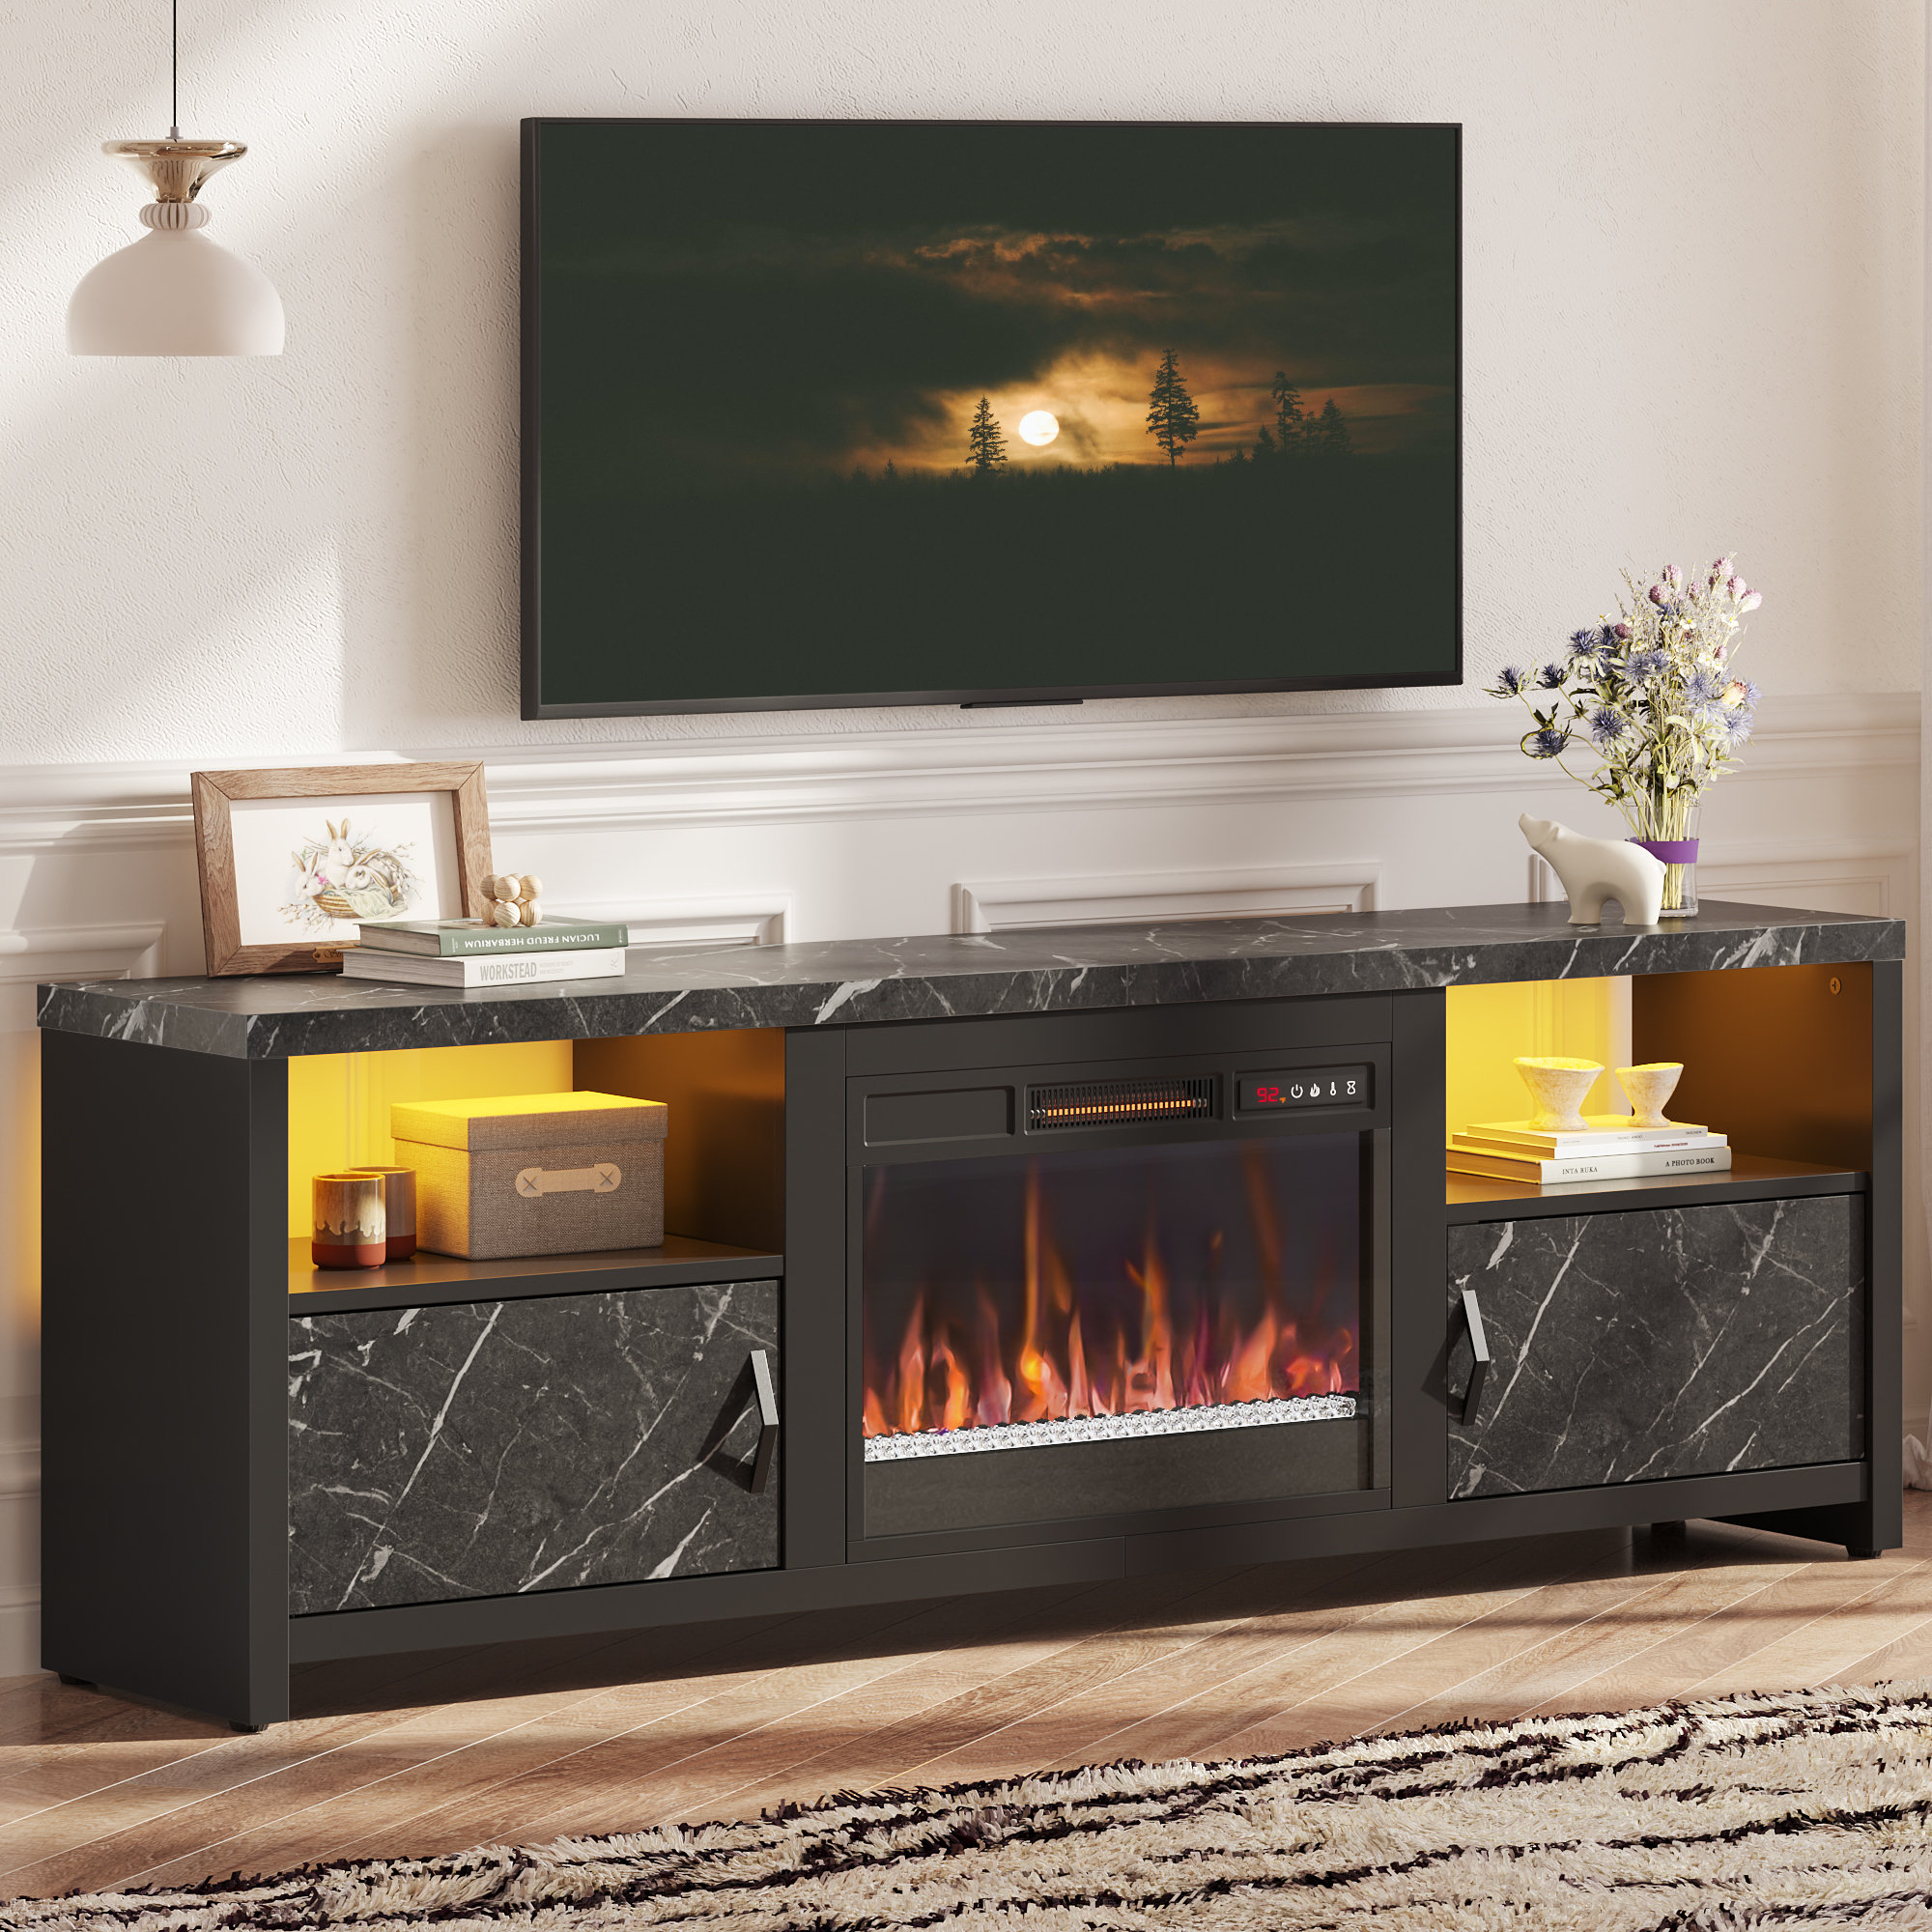 Domyhome LED TV Stand for TVs up to 75" with Electric Fireplace Included,  Spacious Media Console with Storage Cabinets Wayfair